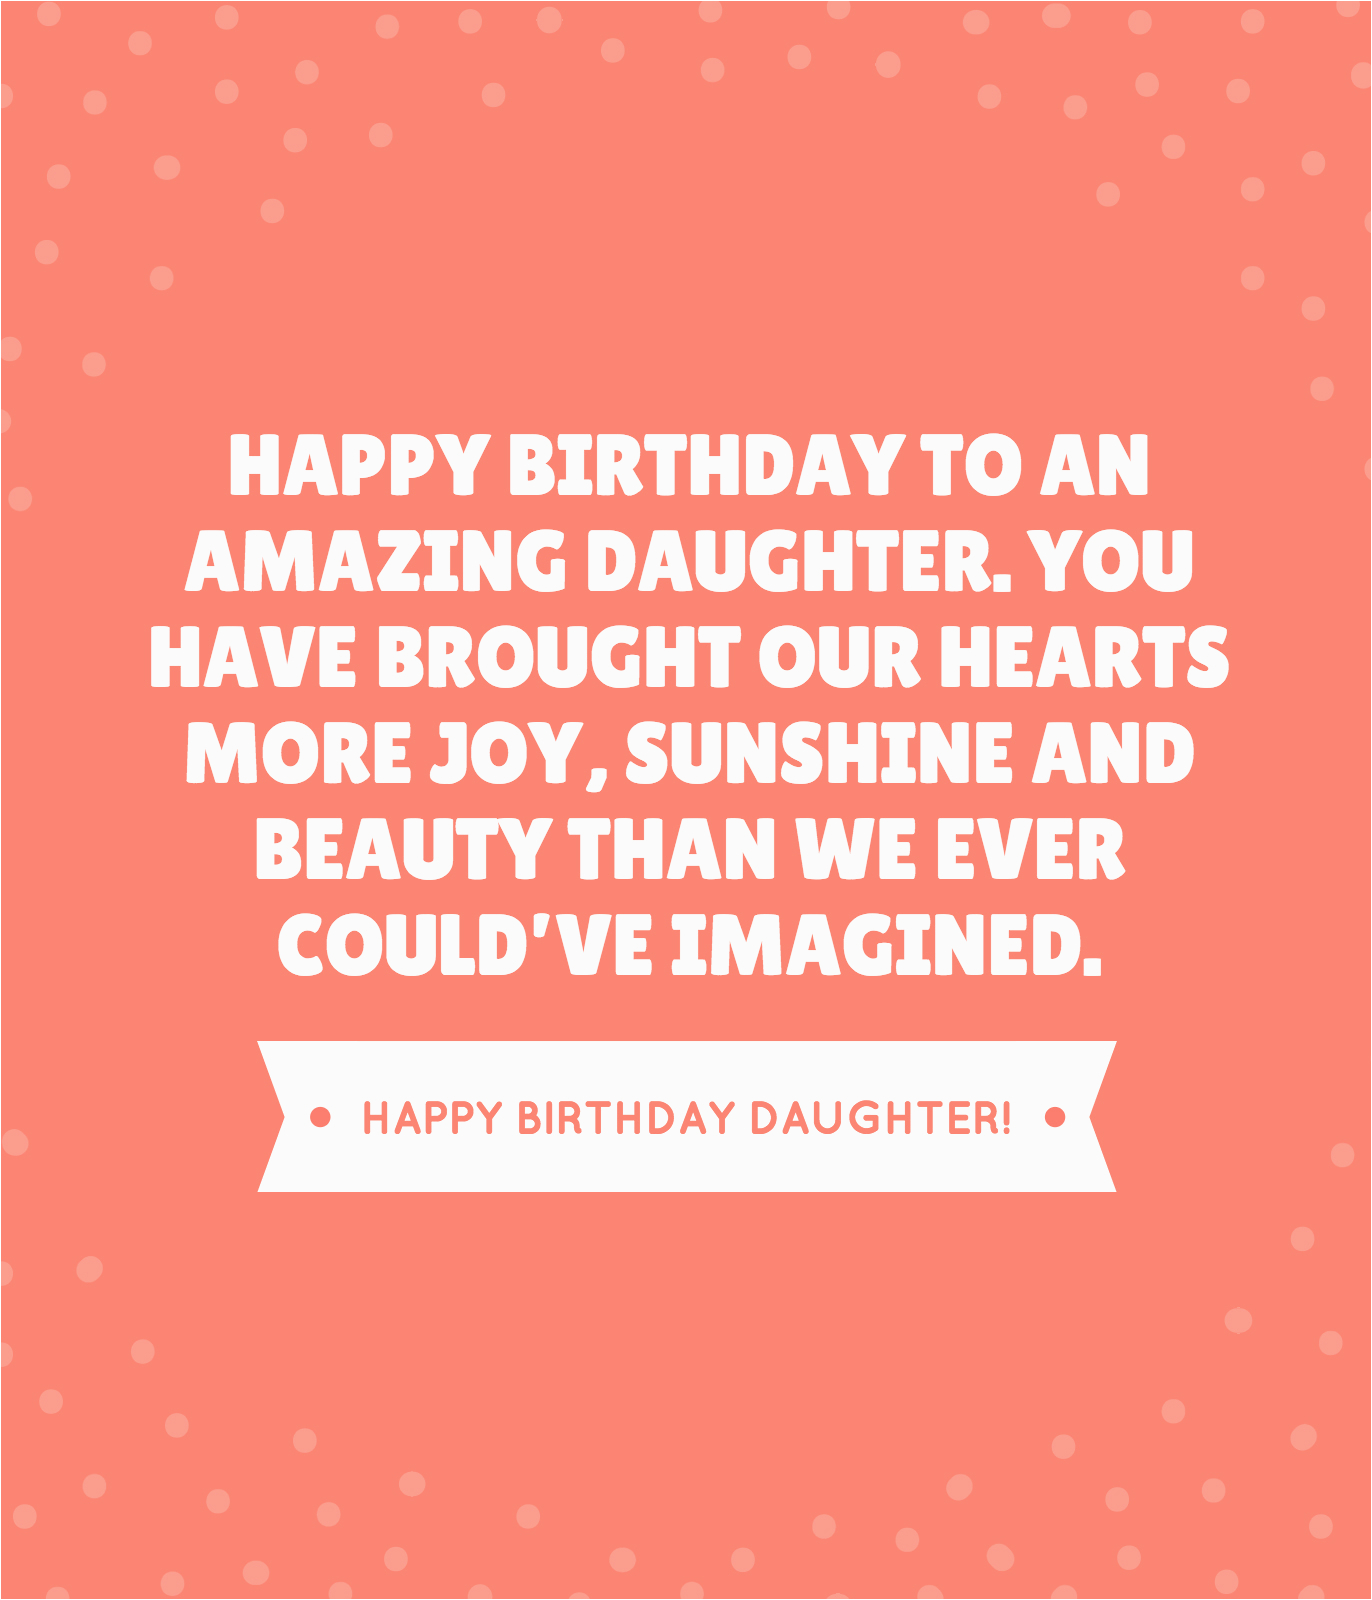 Happy Birthday Quote for A Daughter 35 Beautiful Ways to Say Happy Birthday Daughter Unique